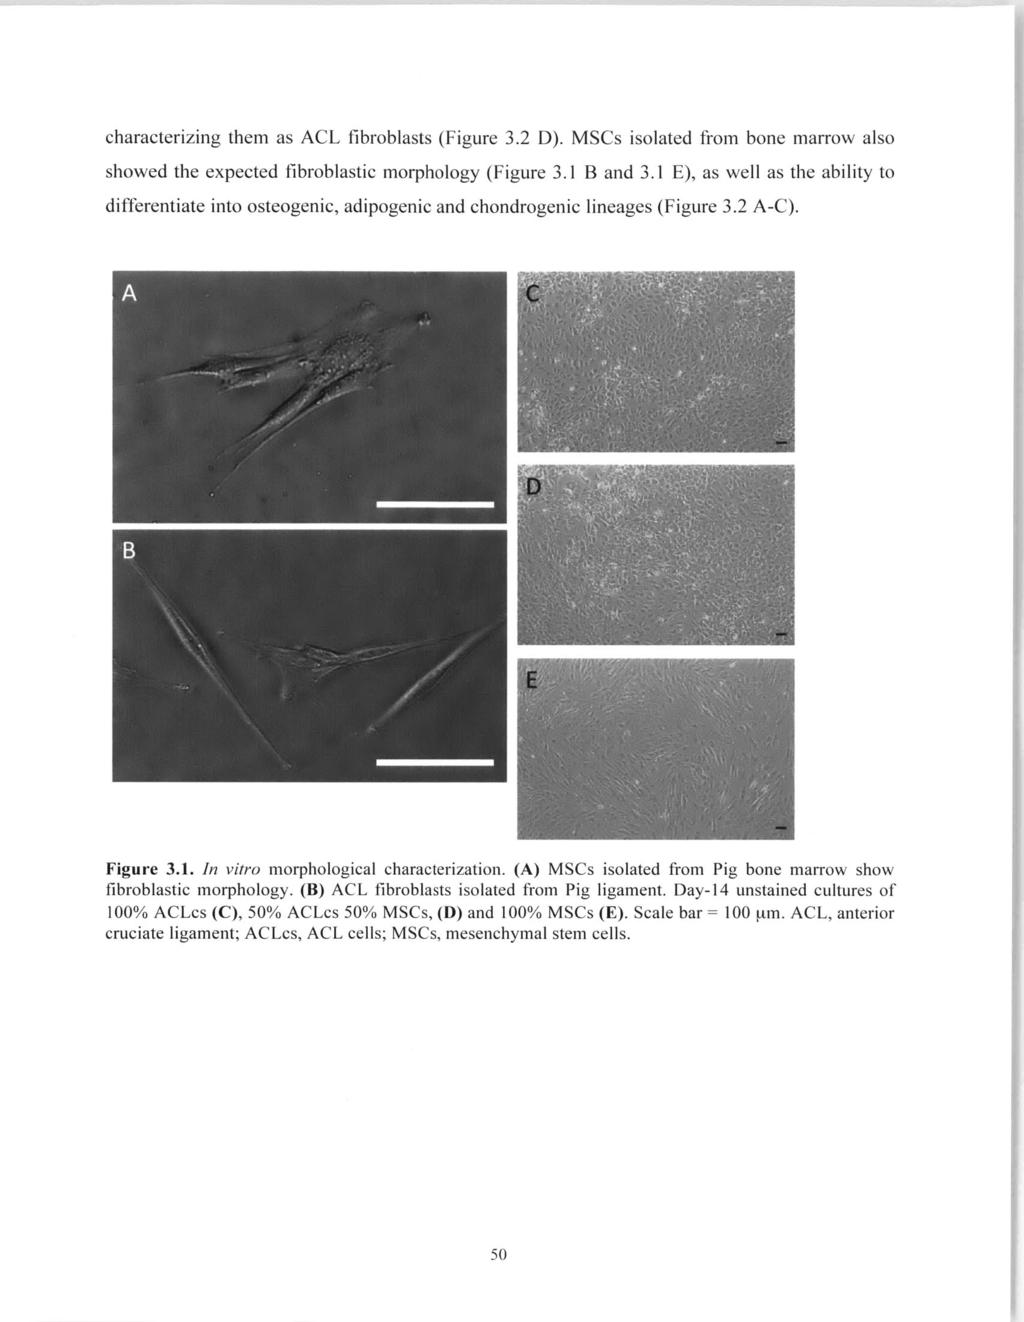 characterizing them as ACL fibroblasts (Figure 3.2 D). MSCs isolated from bone marrow also showed the expected fibroblastic morphology (Figure 3.1 B and 3.